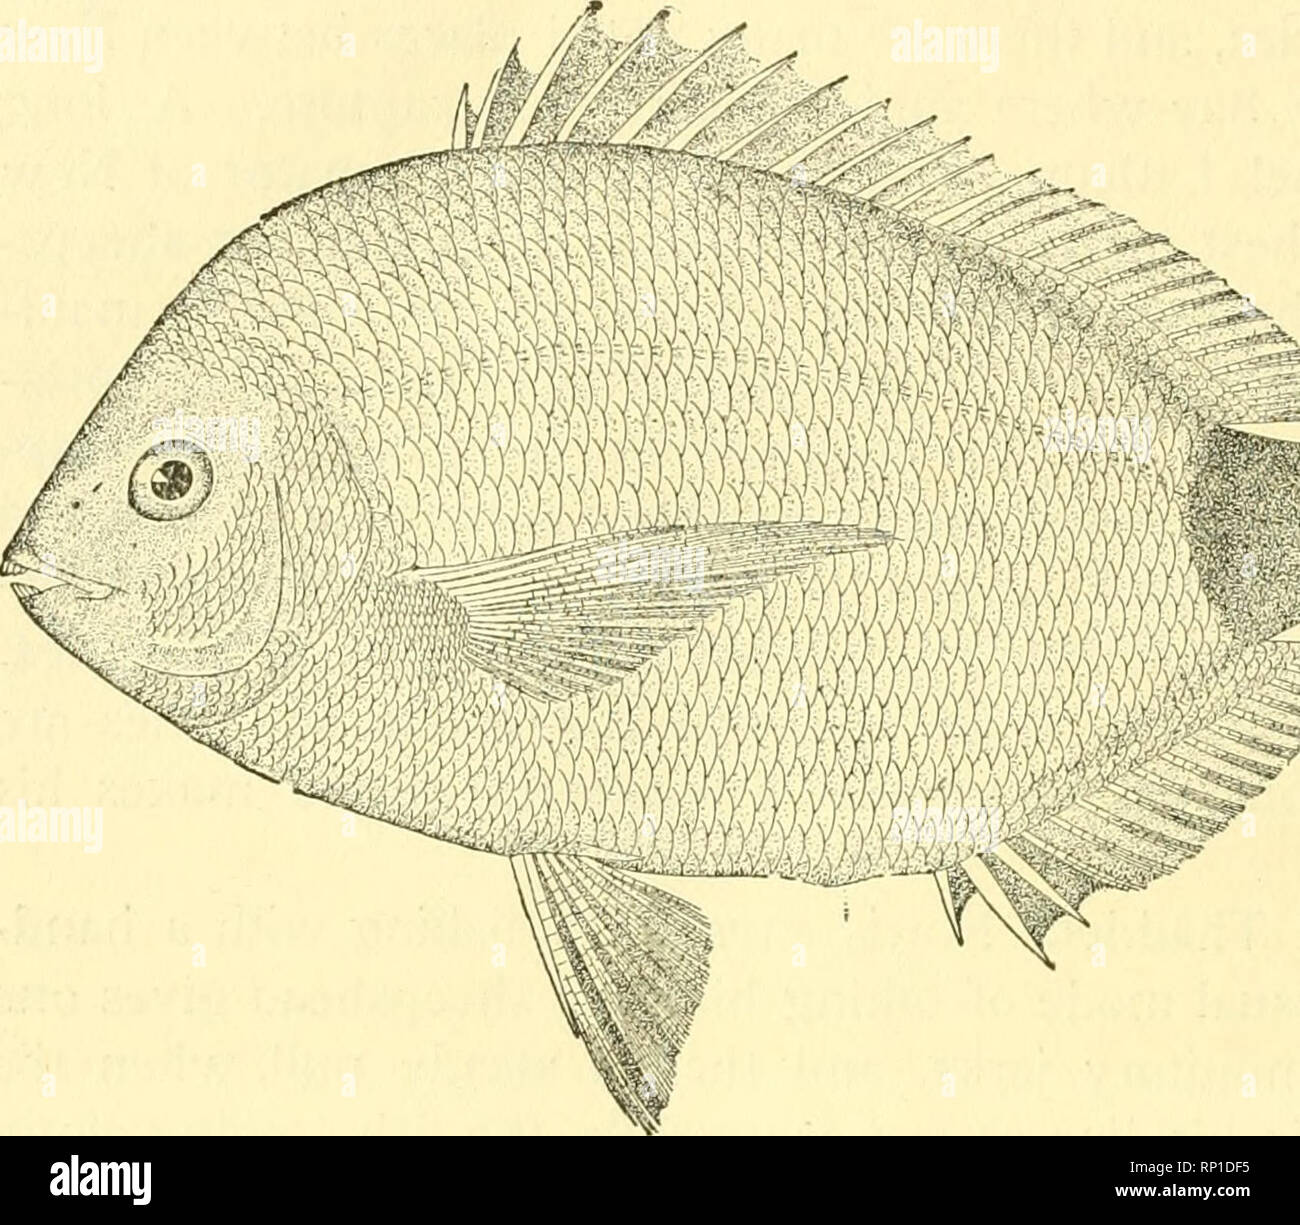 . American food and game fishes : a popular account of all the species found in America north of the Equator, with keys for ready identification, life histories and methods of capture. Fishes -- United States. Diplodus waters, the only one of any importance being the pinfish or spot, Diplodus holbrooki. This fish is found on our South Atlantic and. Gulf coasts from Cape Hatteras to Cedar Keys. At Beaufort, North Carolina, it is not uncommon, and the young swarm about the wharves. It is frequent also at Lake Worth, where it is called jimmy. It reaches 8 inches in length and is an excellent pan- Stock Photo